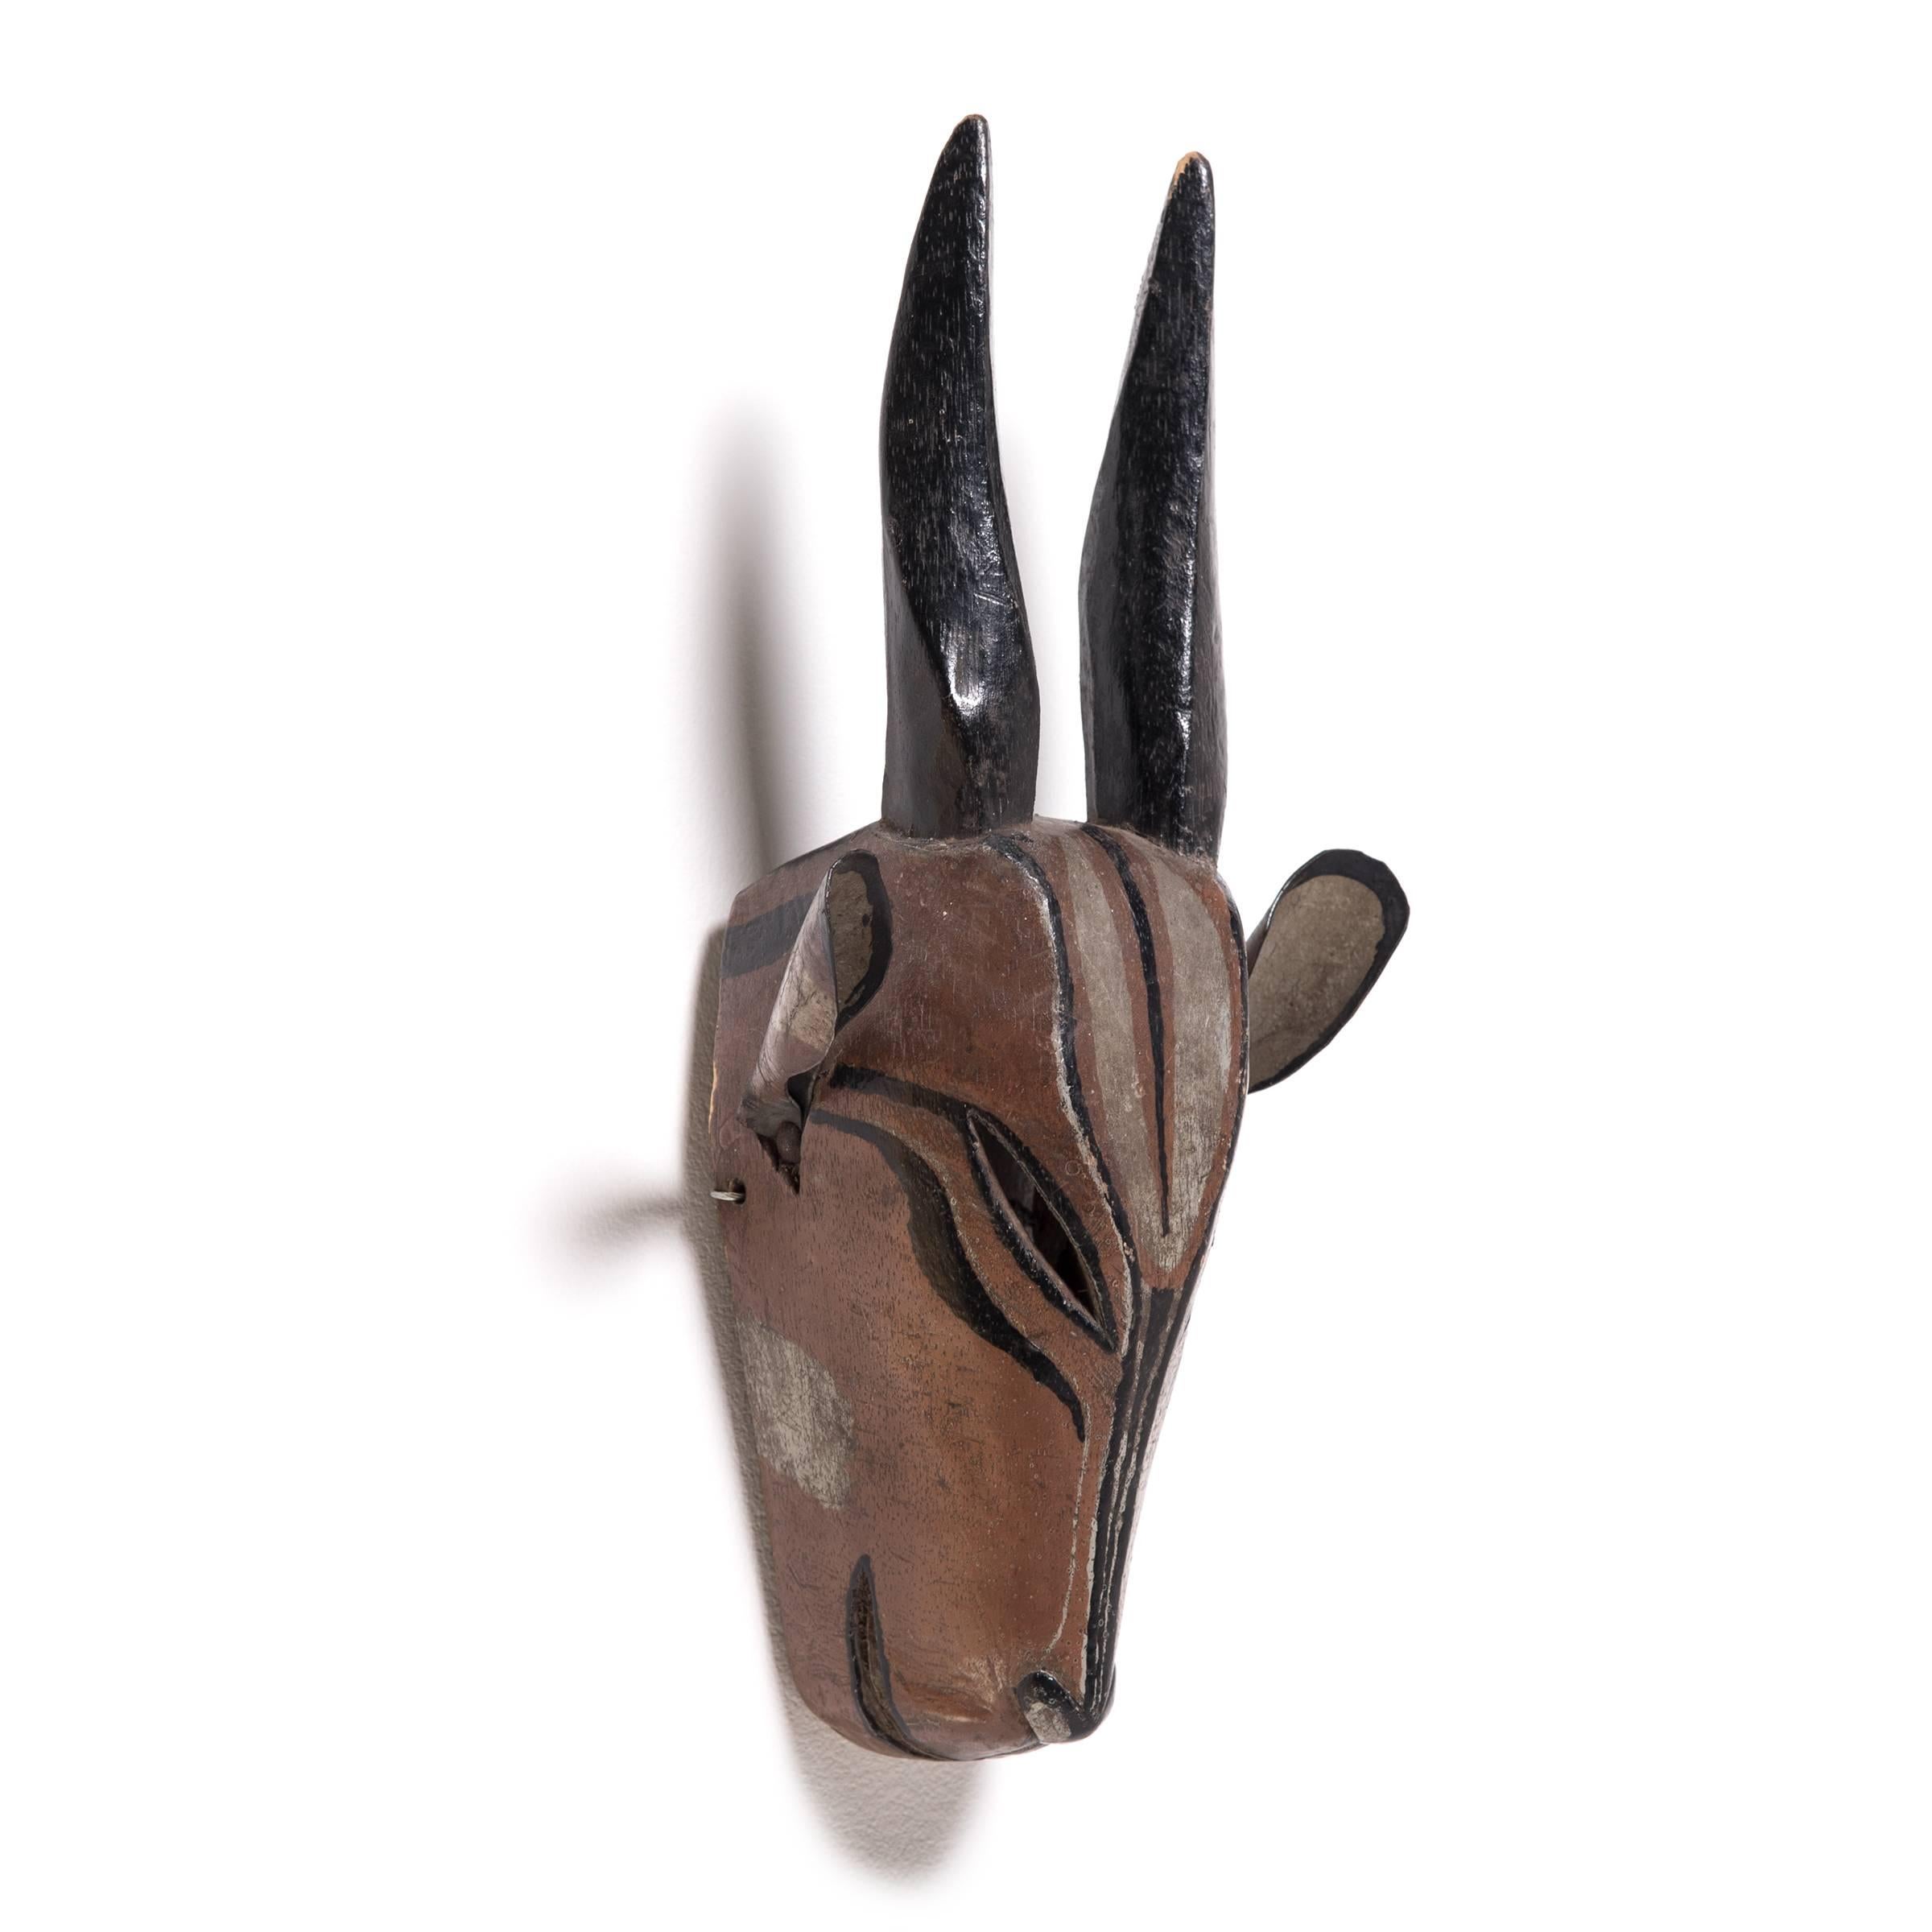 The fine finish and detail work on this antelope mask are hallmarks of the Igbo master craftspeople. The sleek, simplified form is evocative, calling to mind all the beauty and grace of the antelope in motion. The precise painting adds depth and